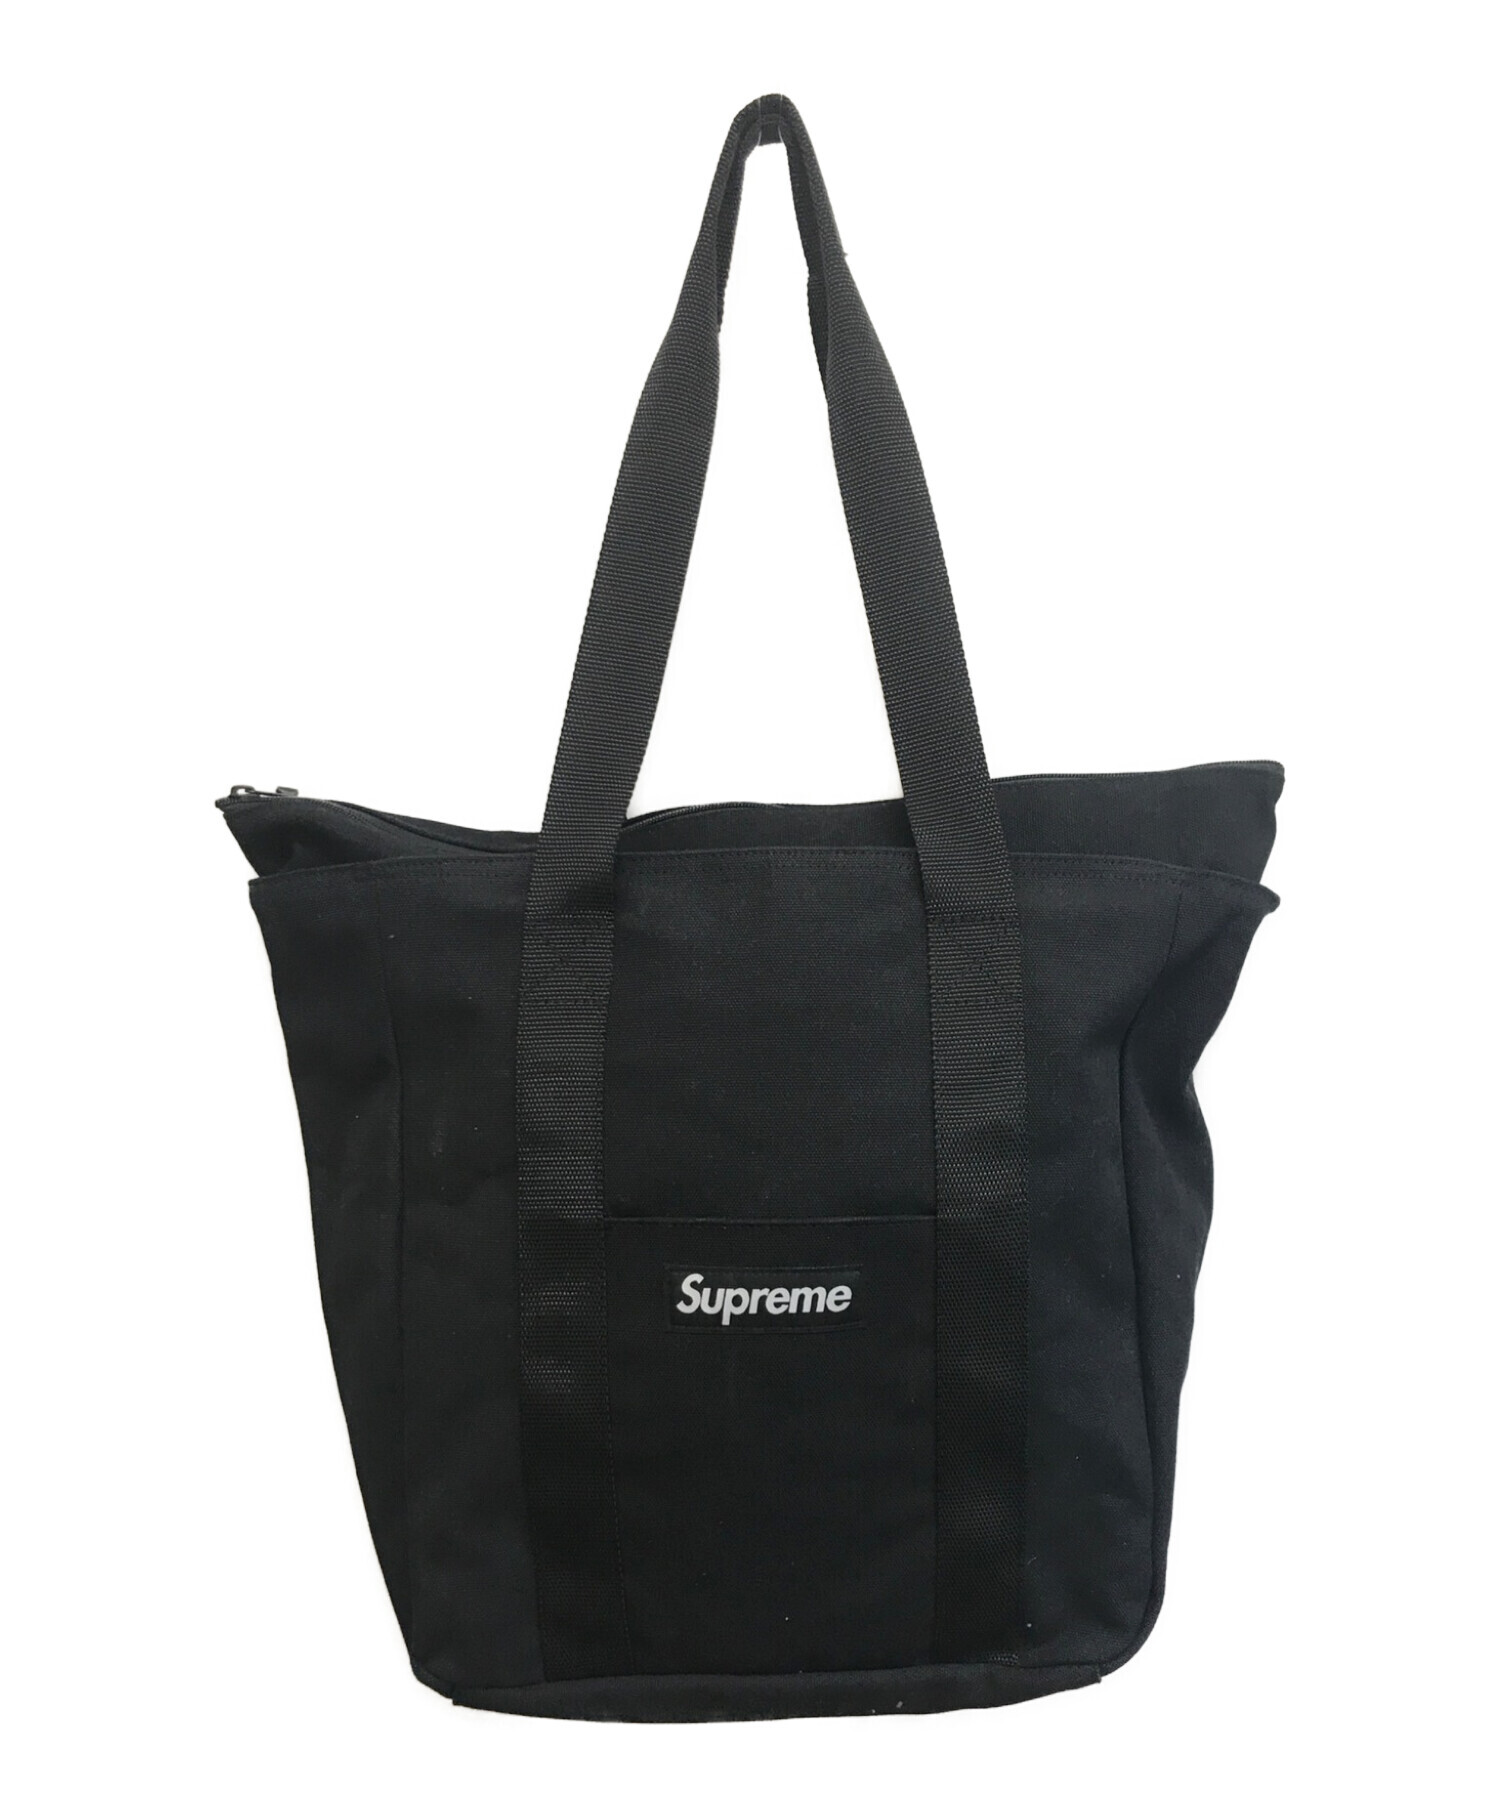 Supreme Canvas Tote キャンバストートバックバッグ - トートバッグ